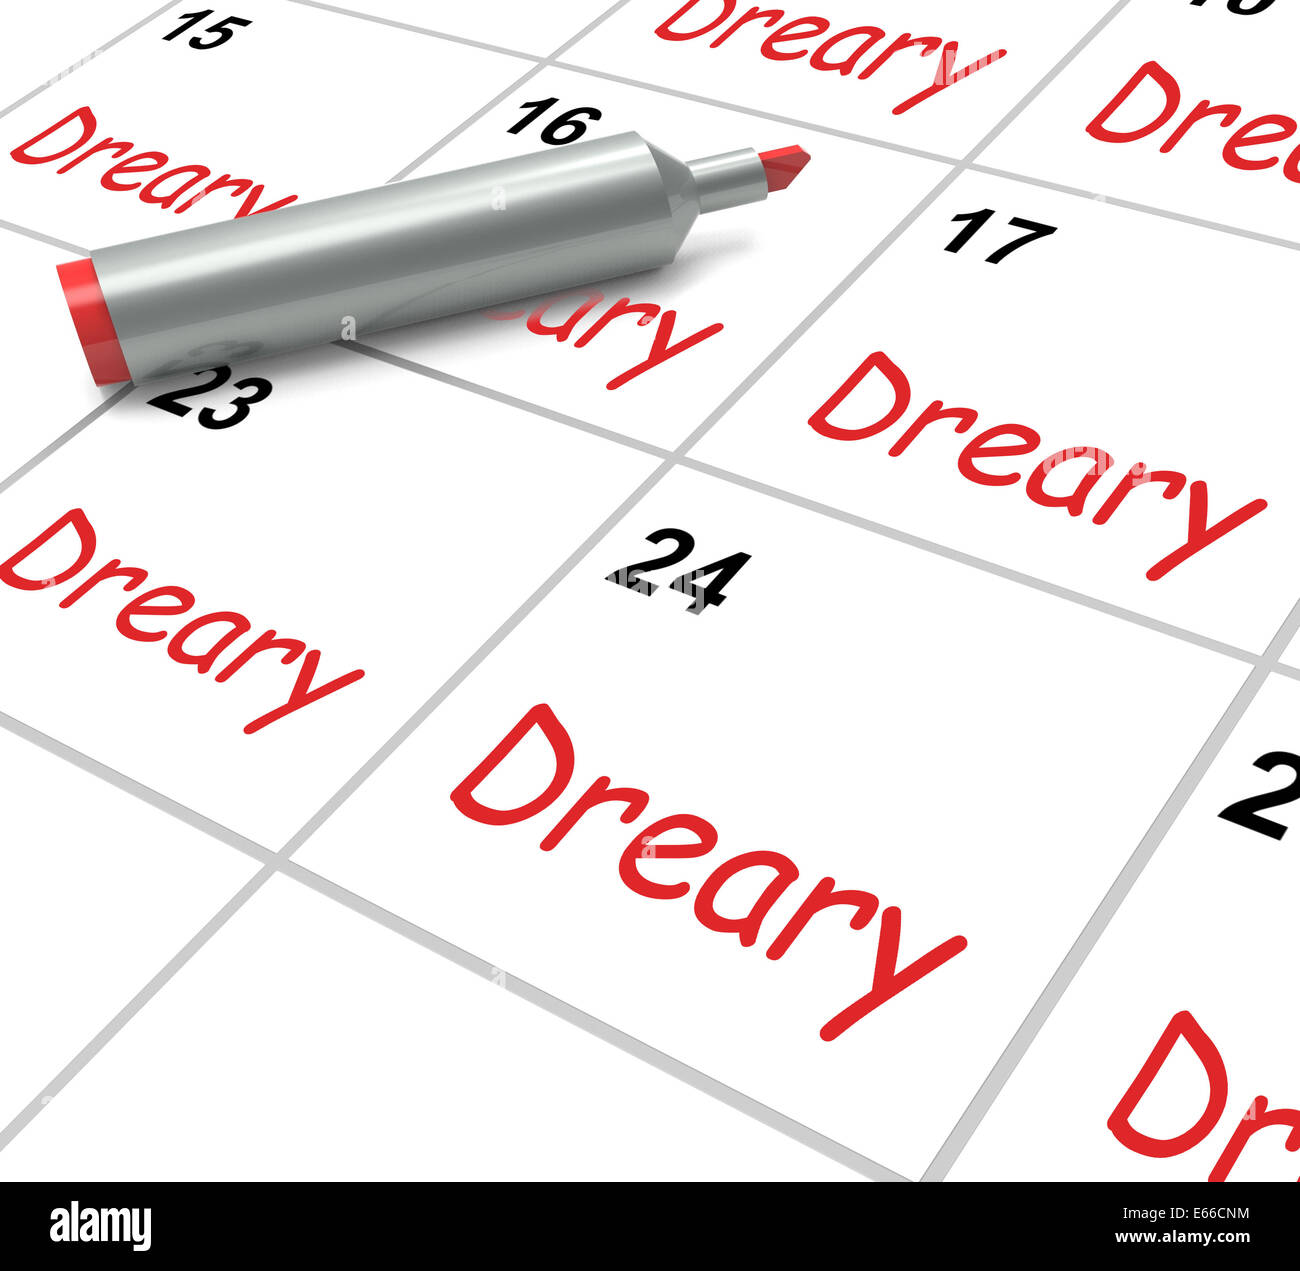 Dreary Calendar Meaning Monotonous Dull And Uneventful Stock Photo